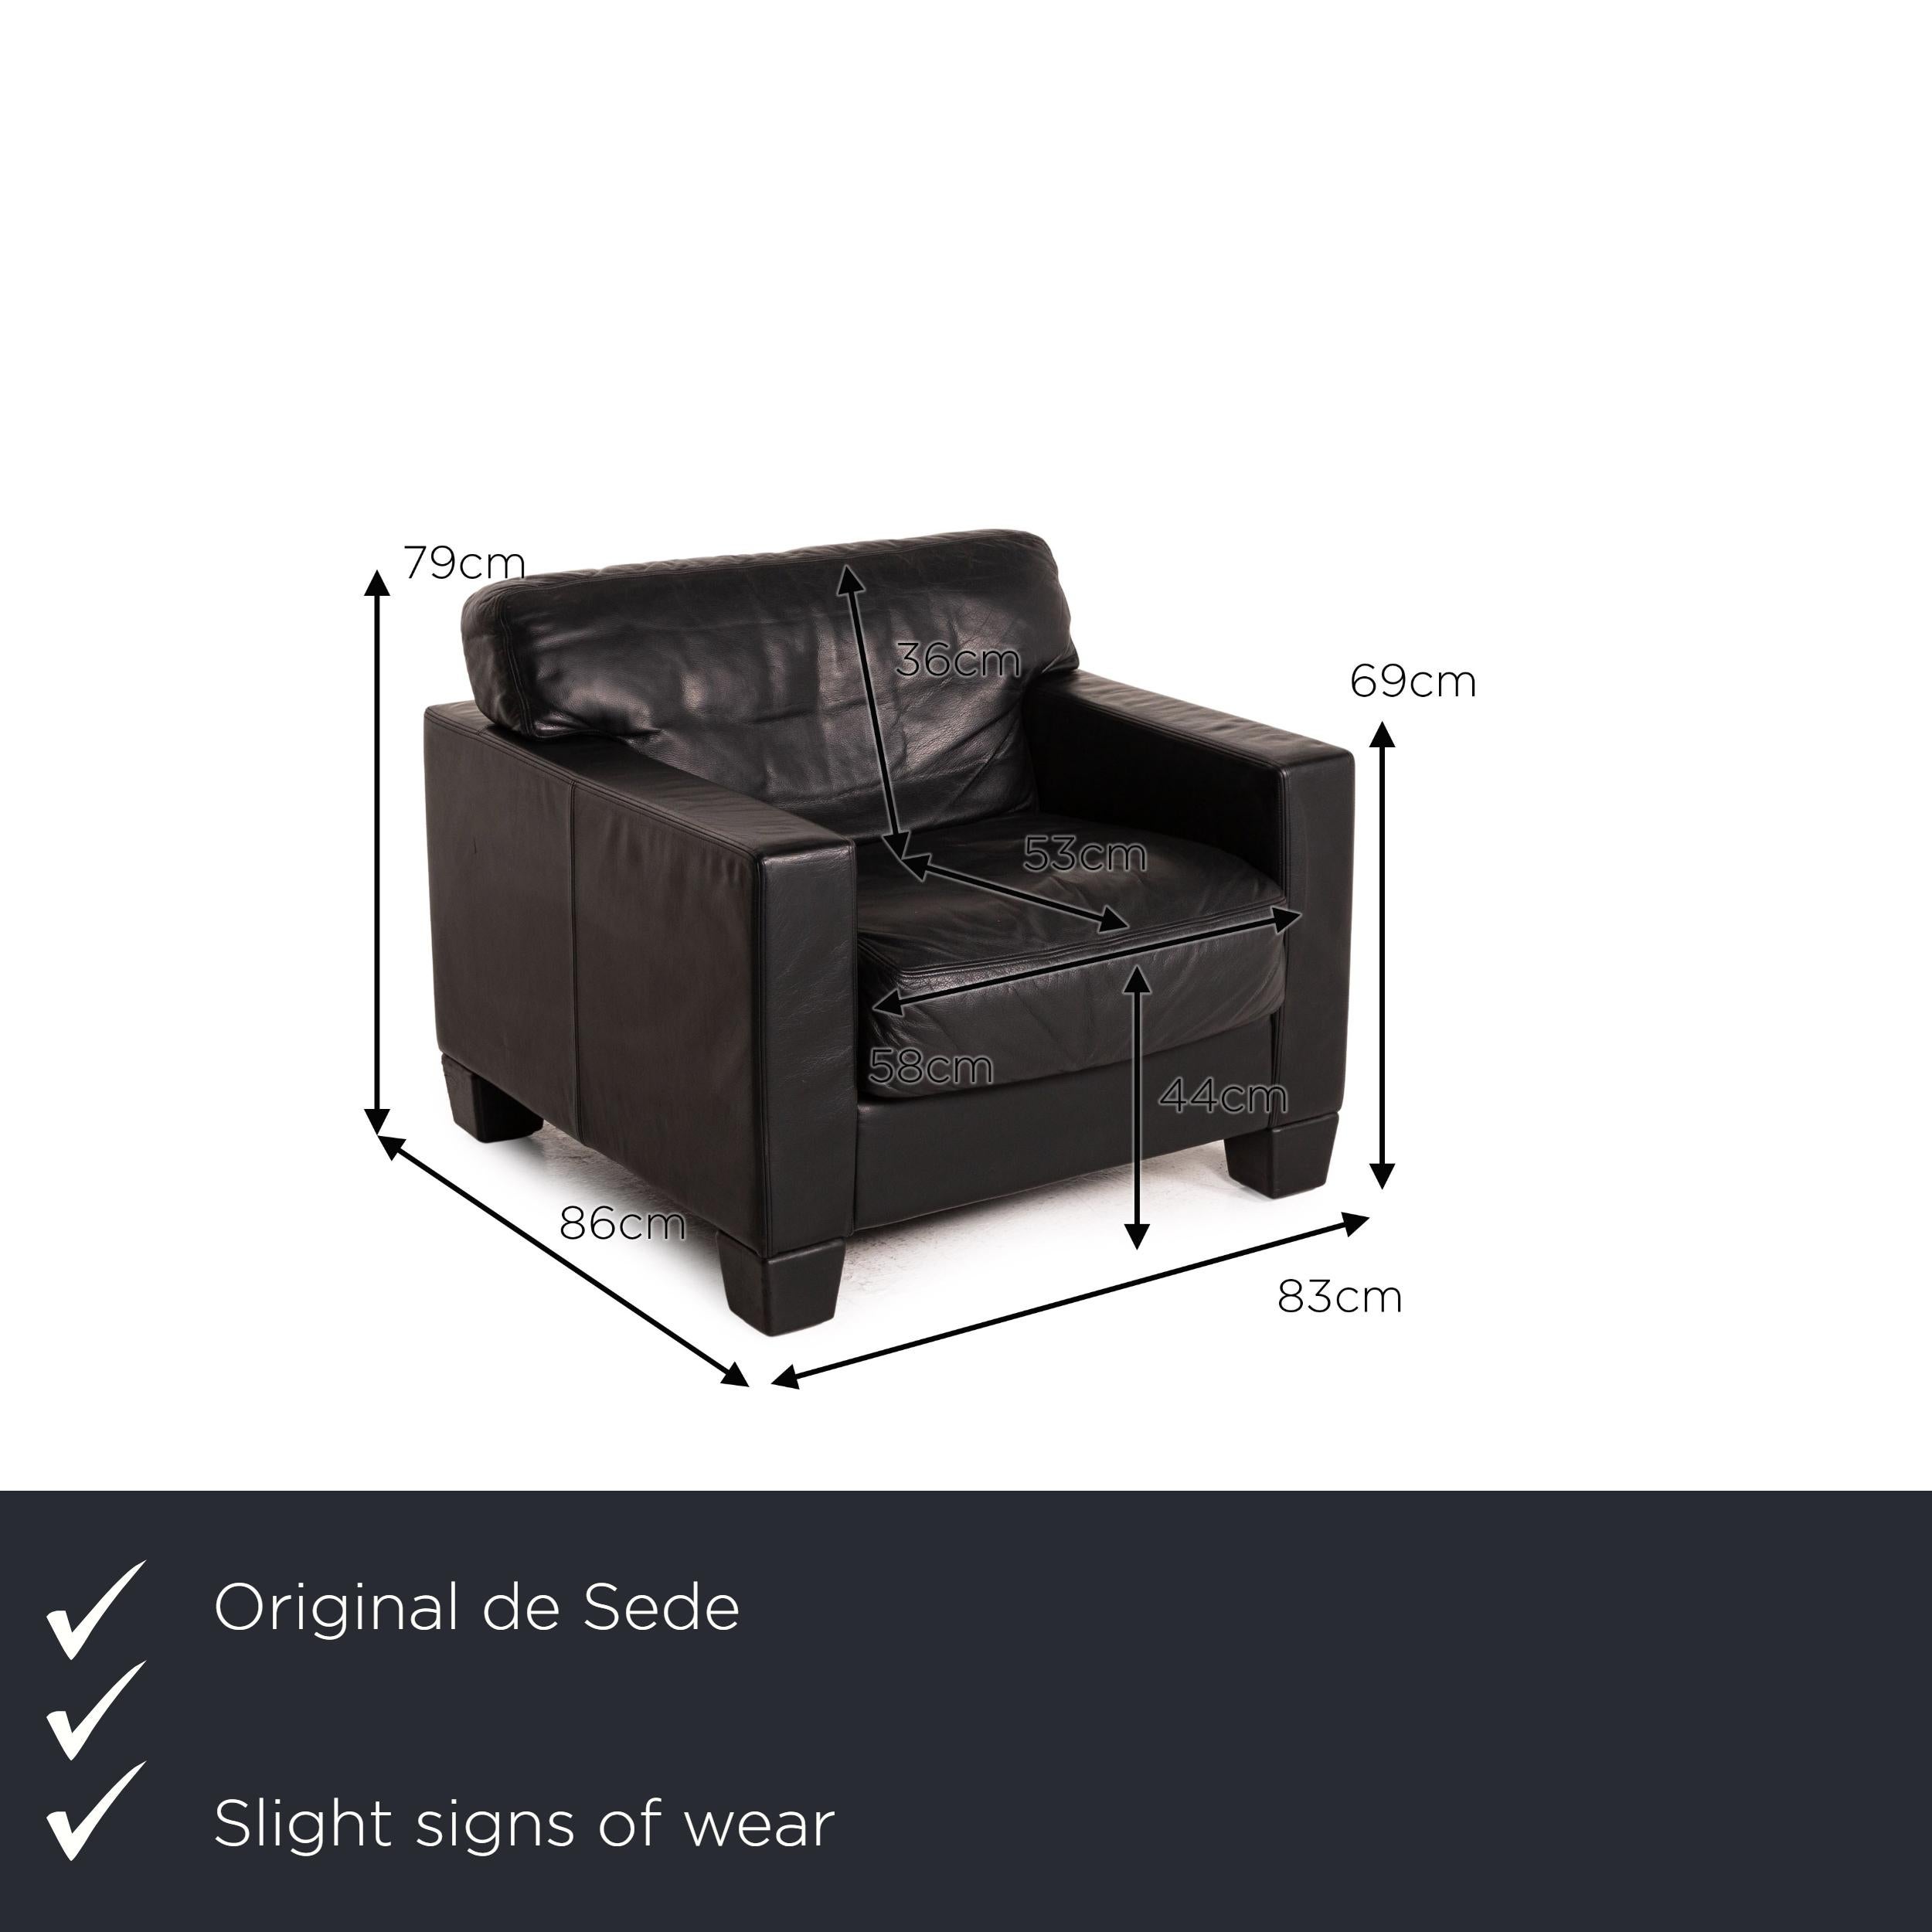 We present to you a De Sede DS 17 leather armchair black.
 

 Product measurements in centimeters:
 

Depth: 86
Width: 83
Height: 79
Seat height: 44
Rest height: 69
Seat depth: 53
Seat width: 58
Back height: 36.
 
 